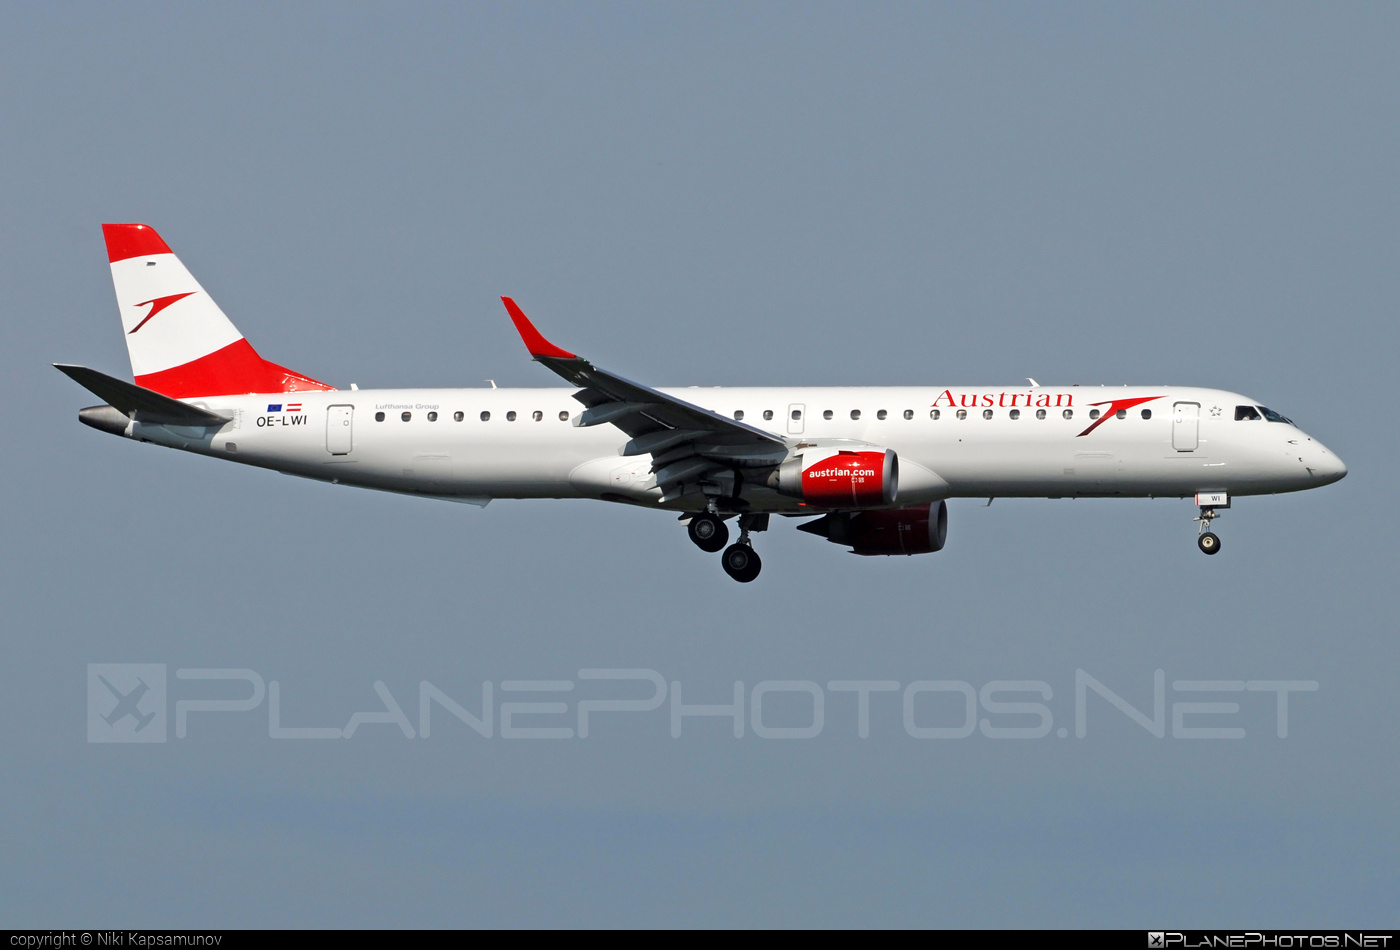 Embraer E195LR (ERJ-190-200LR) - OE-LWI operated by Austrian Airlines #austrian #austrianAirlines #e190 #e190200 #e190200lr #e195lr #embraer #embraer190200lr #embraer195 #embraer195lr